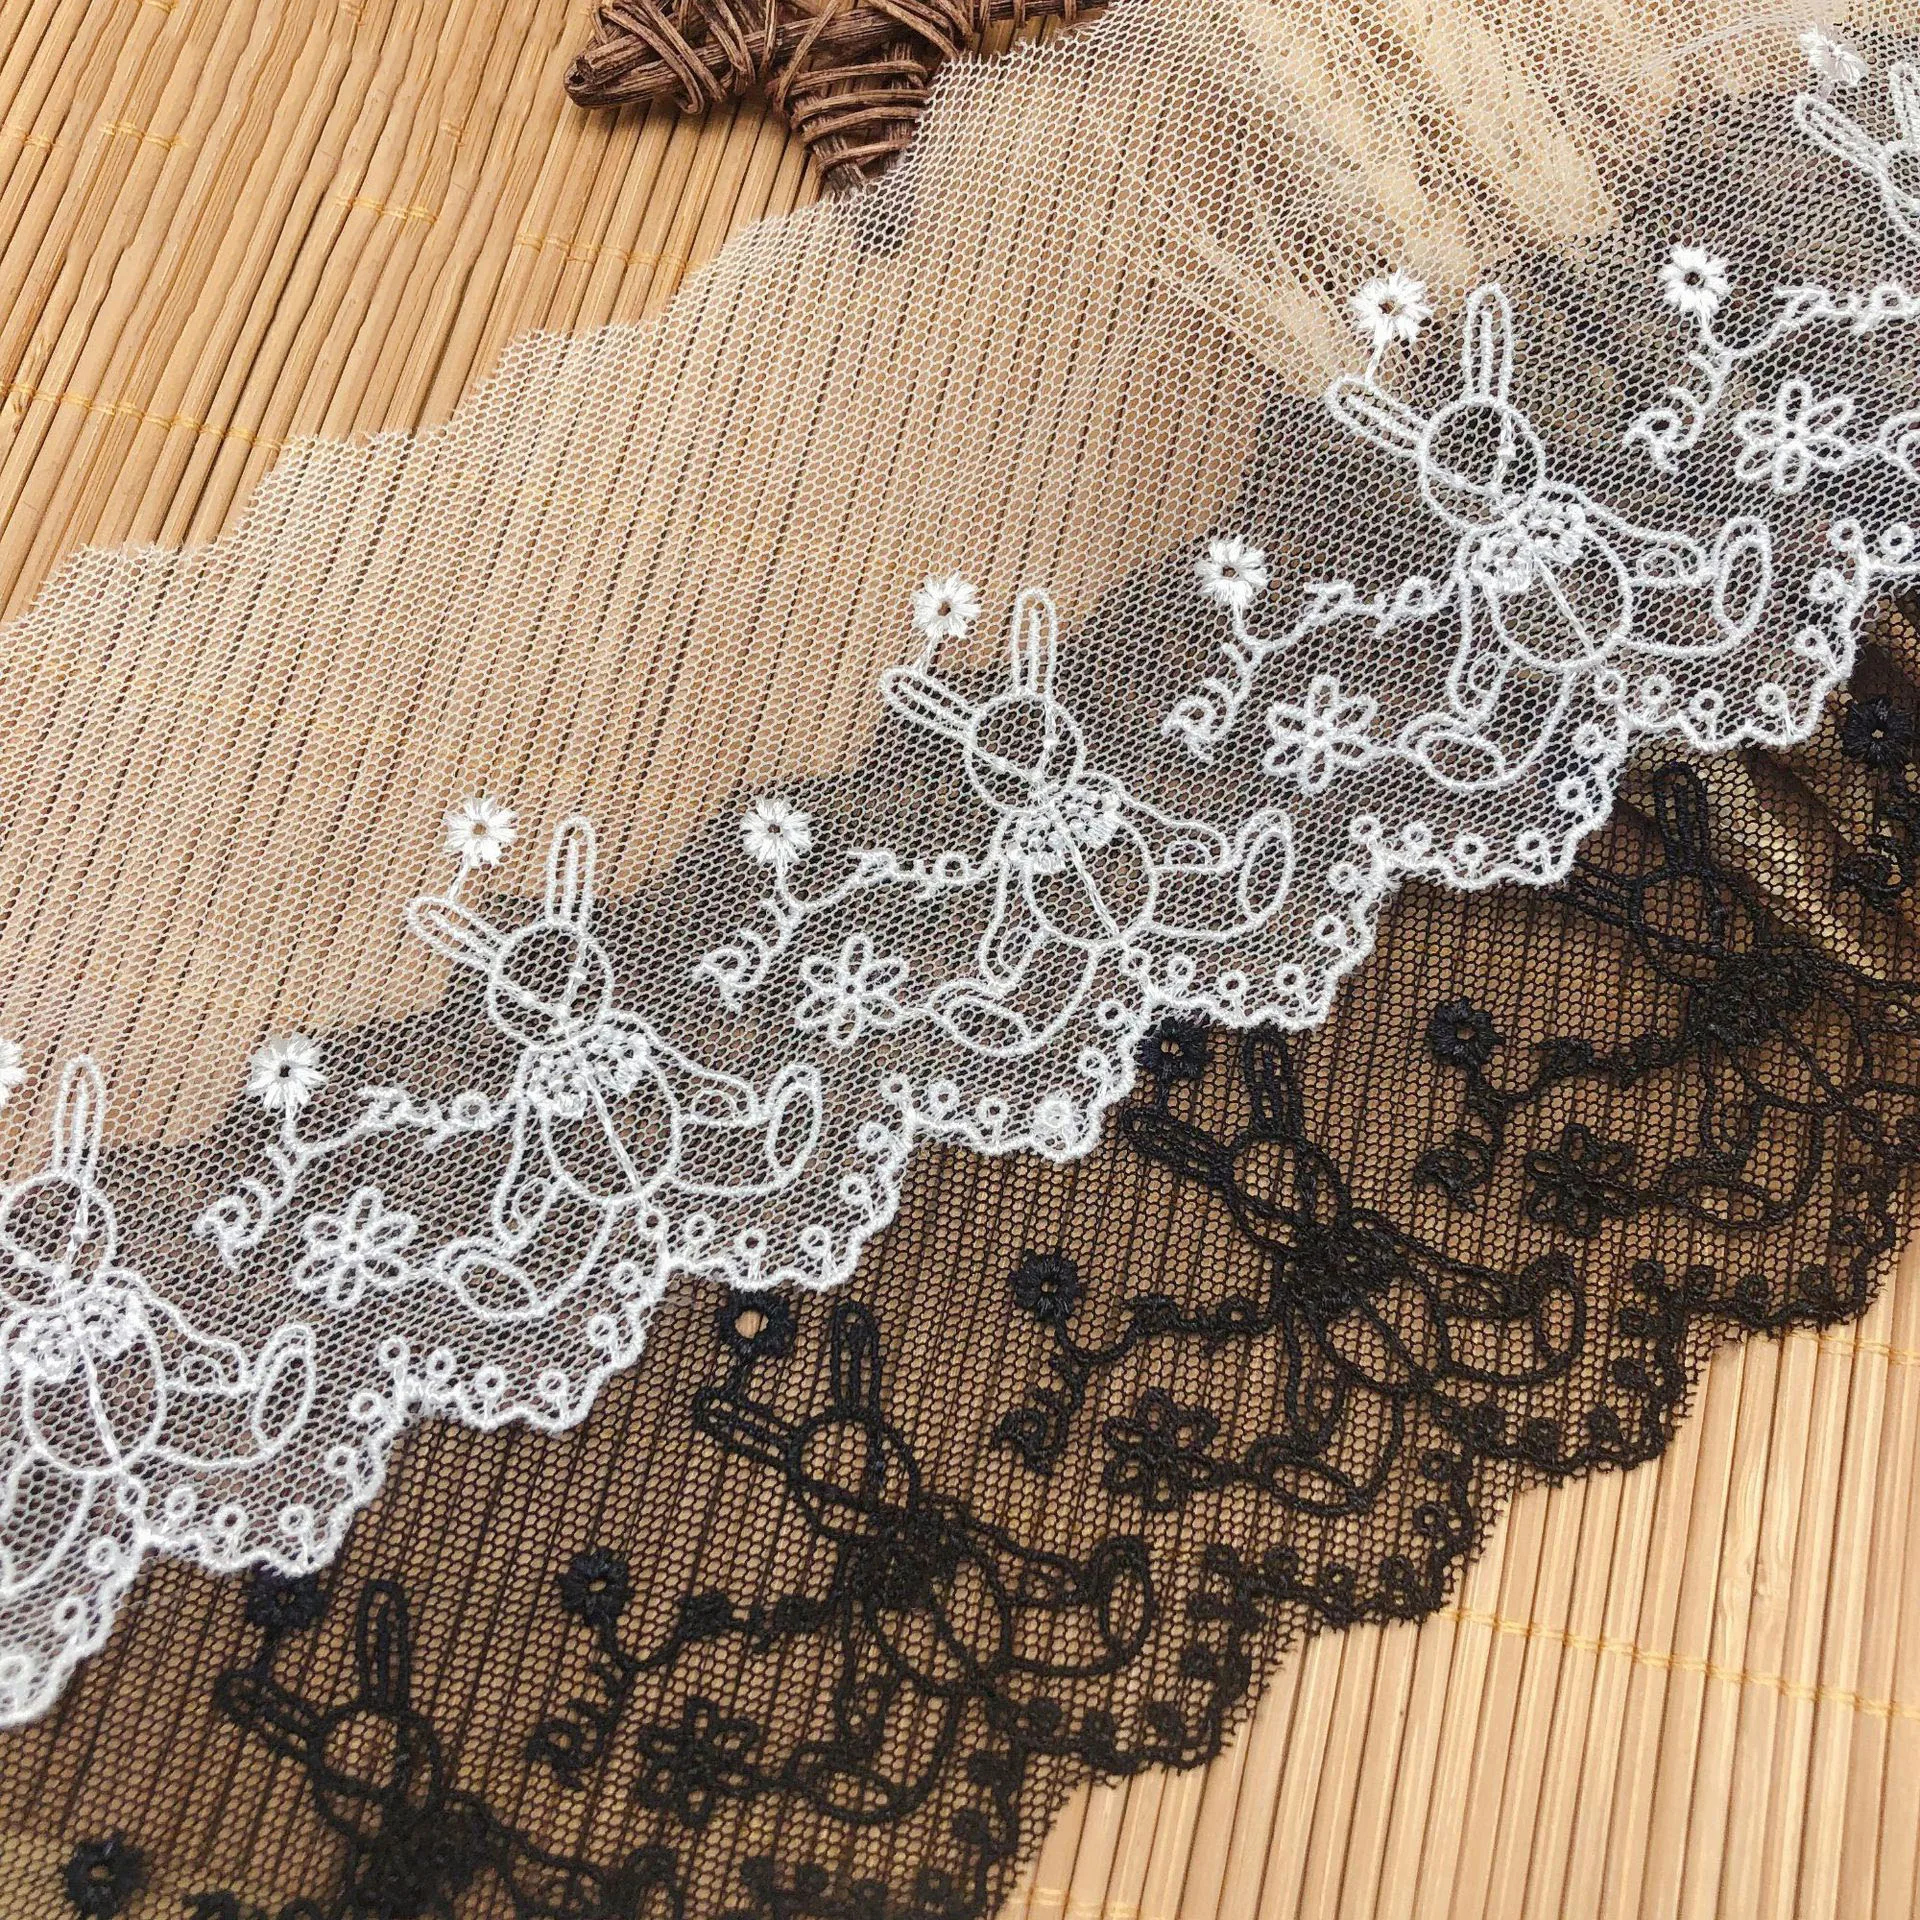 

2yards 9.6cm new Lolita Net yarn embroidery lace vintage dress skirt dress fabric lace accessories